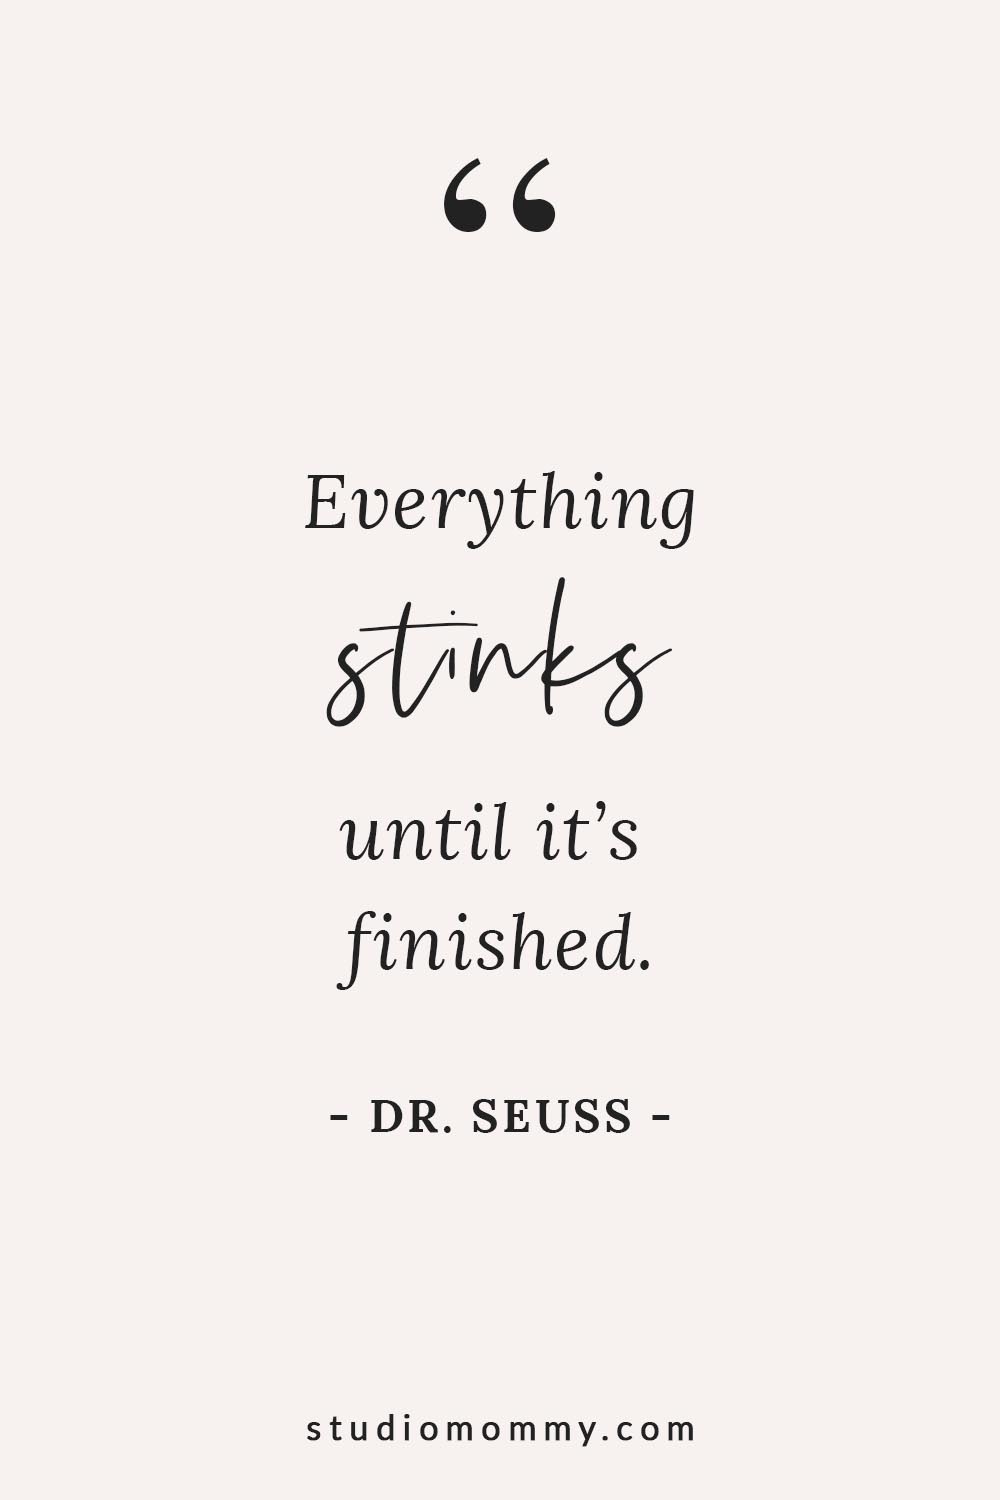 Everything stinks until it's finished. - Dr. Seuss @studiomommy